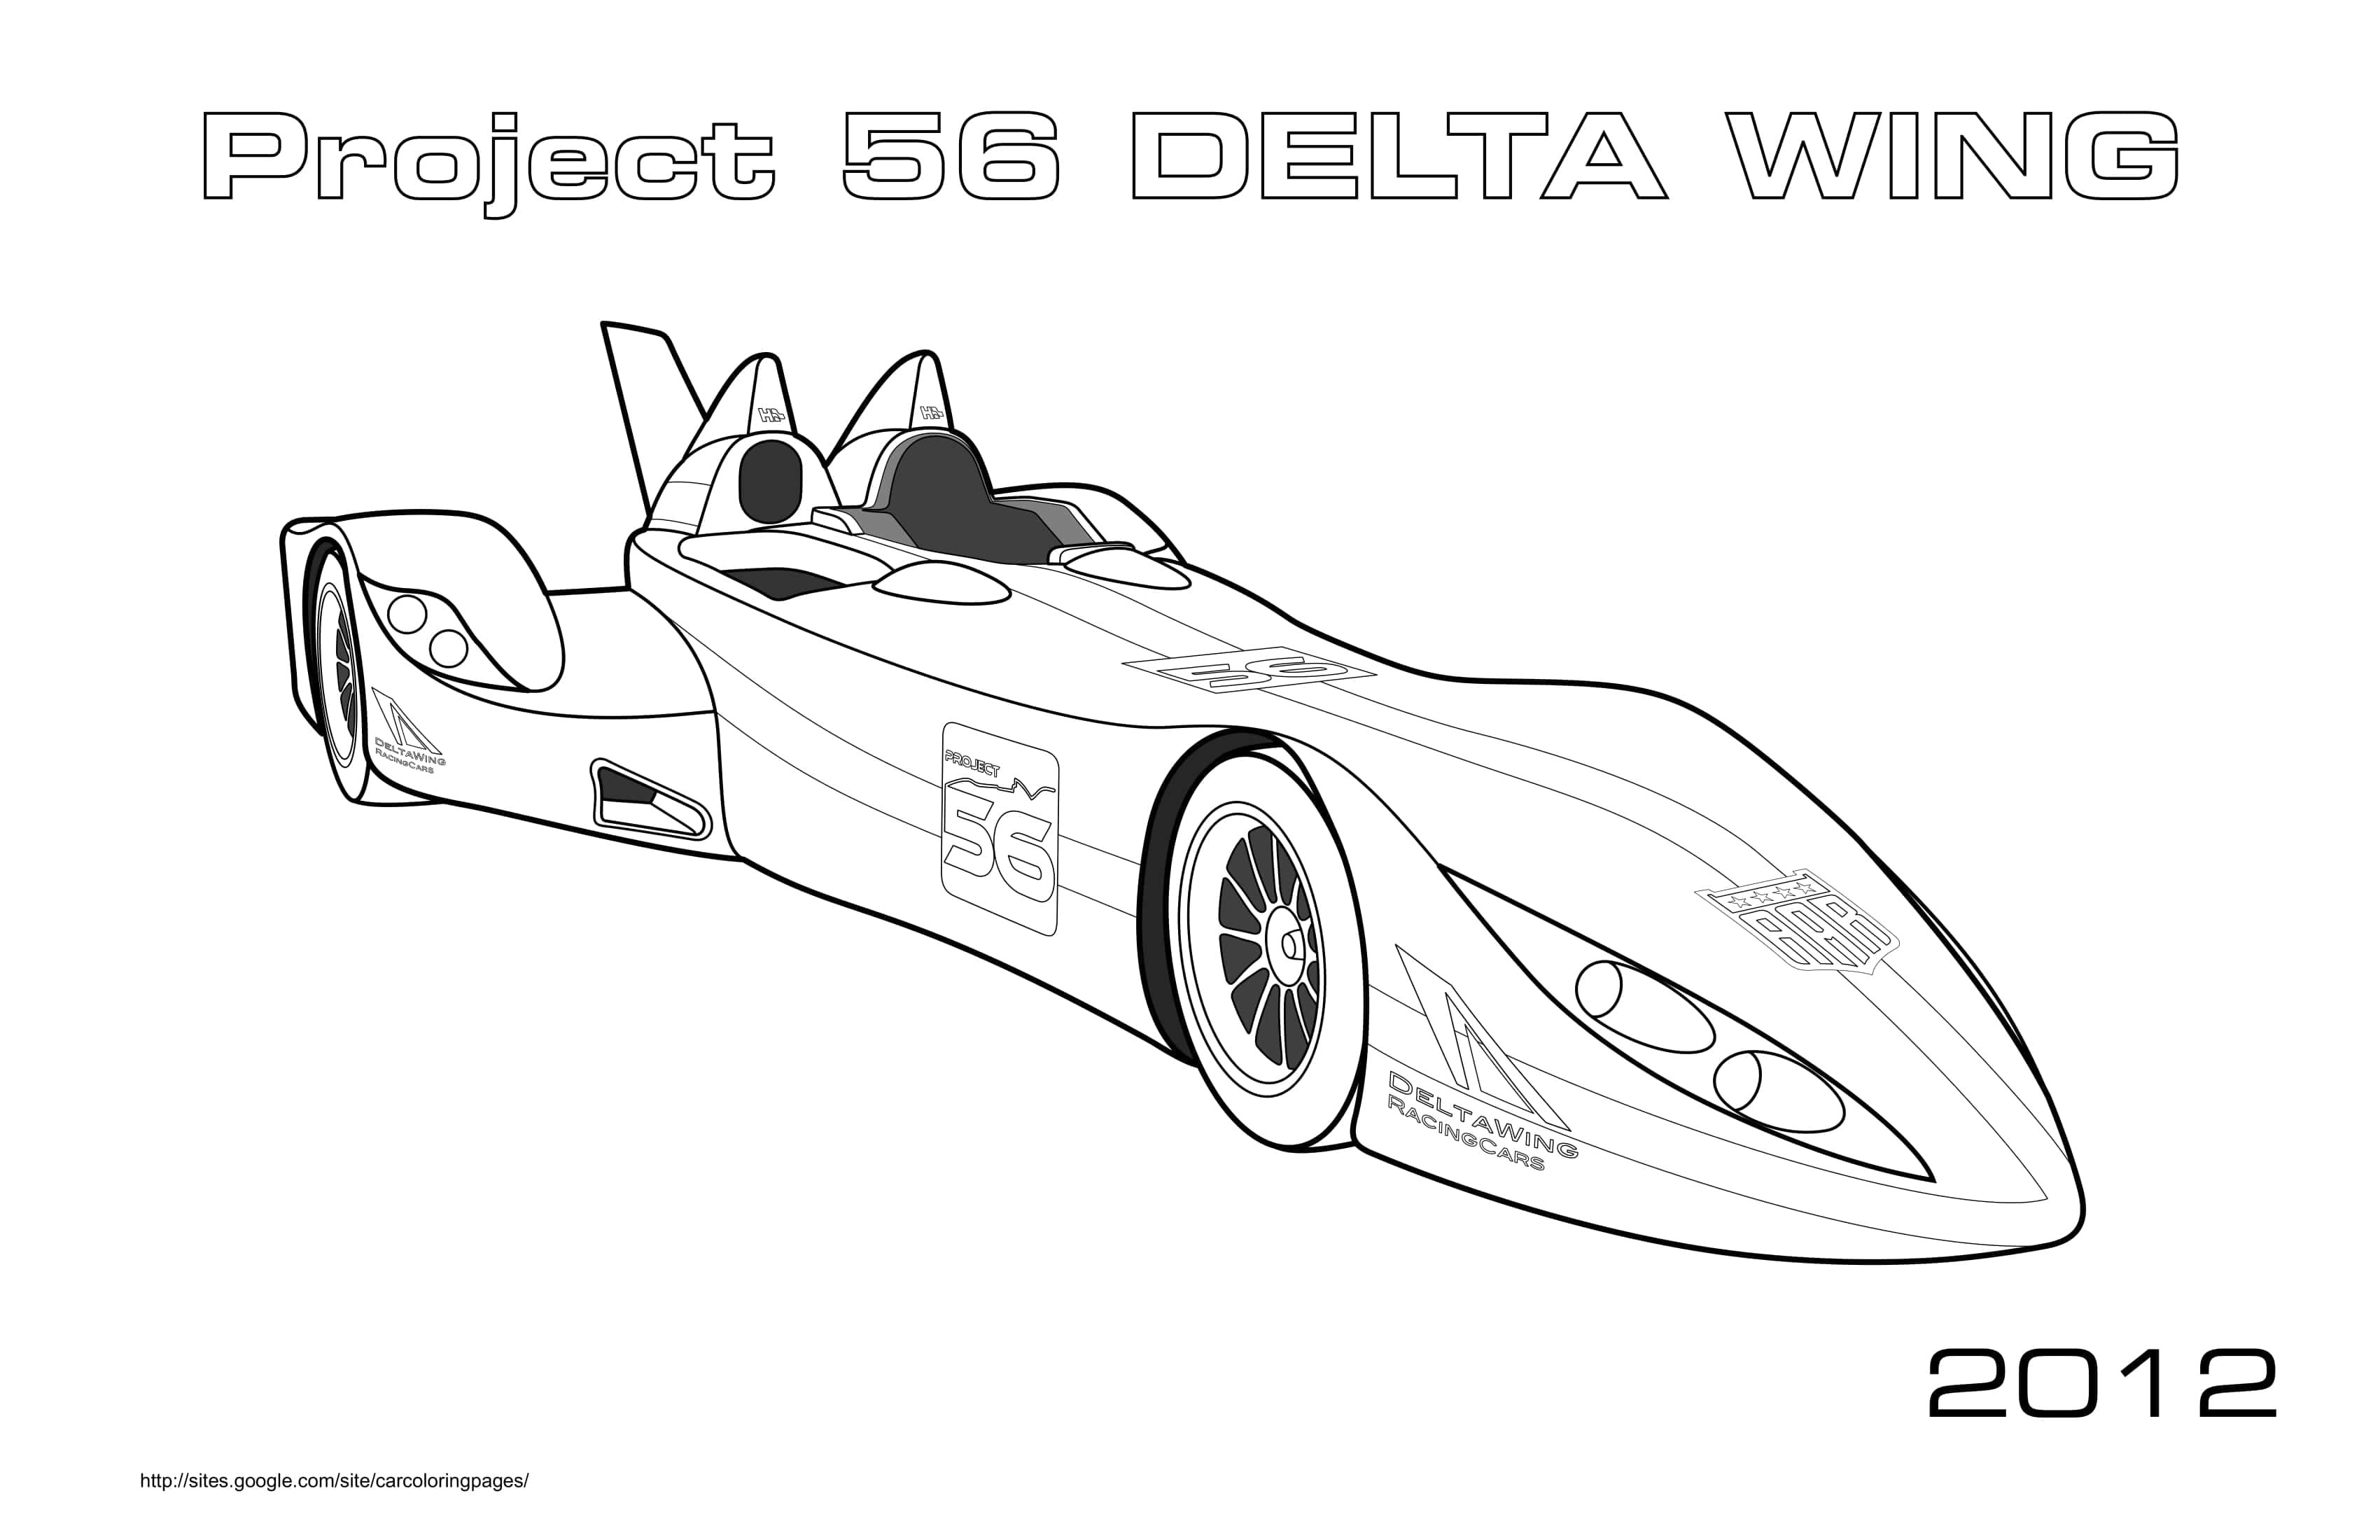 Project 56 Delta Wing 2012 Coloring Page